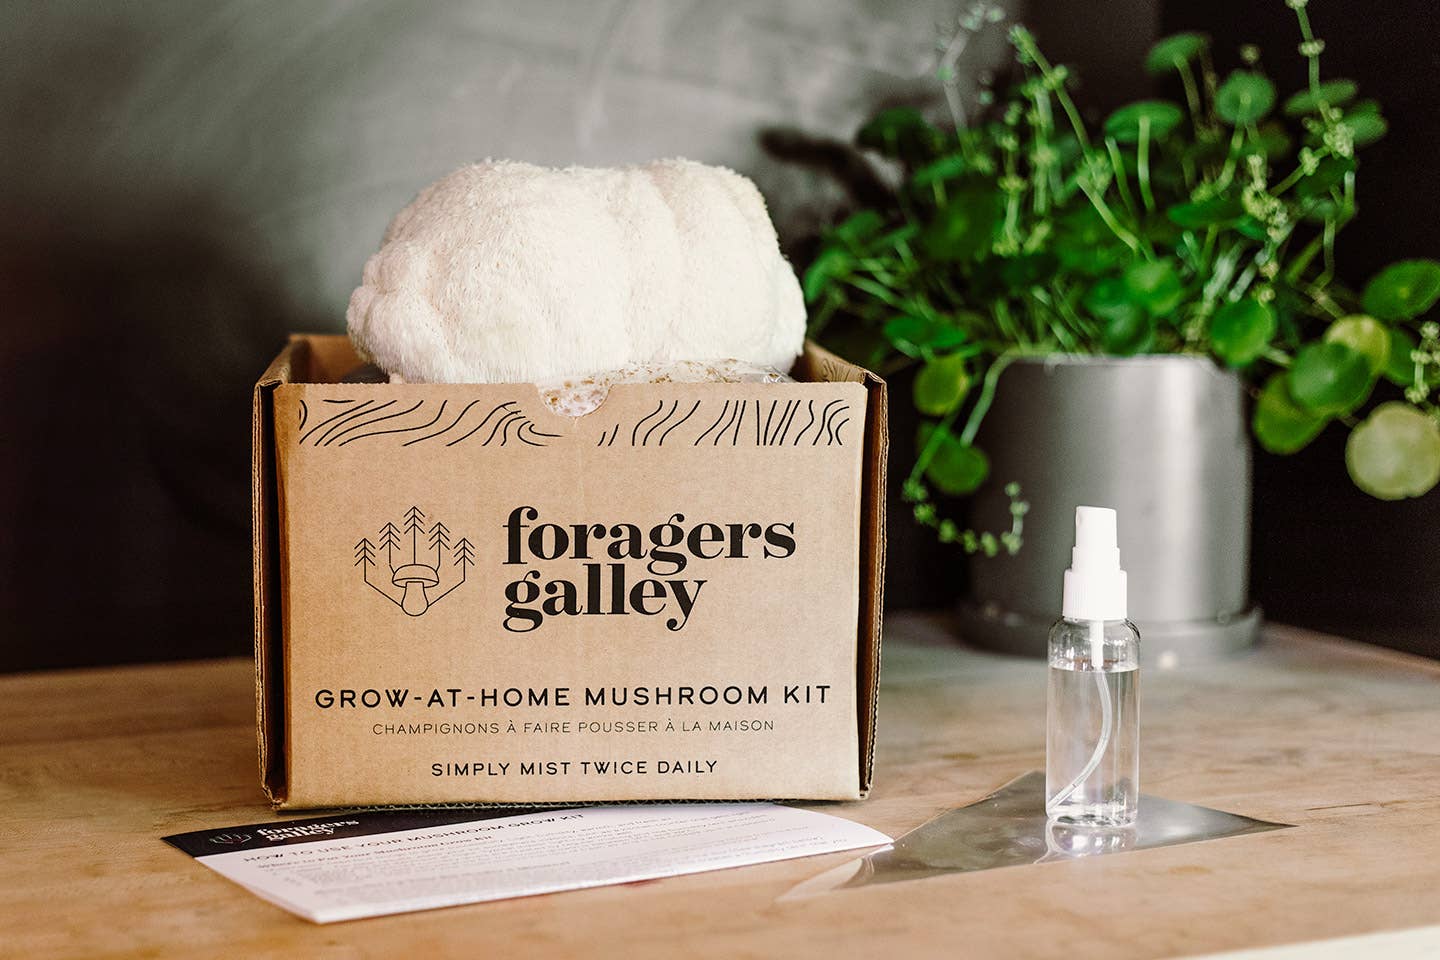 The Foragers Galley Limited - Lion's Mane Mushroom Grow-at-Home Kit